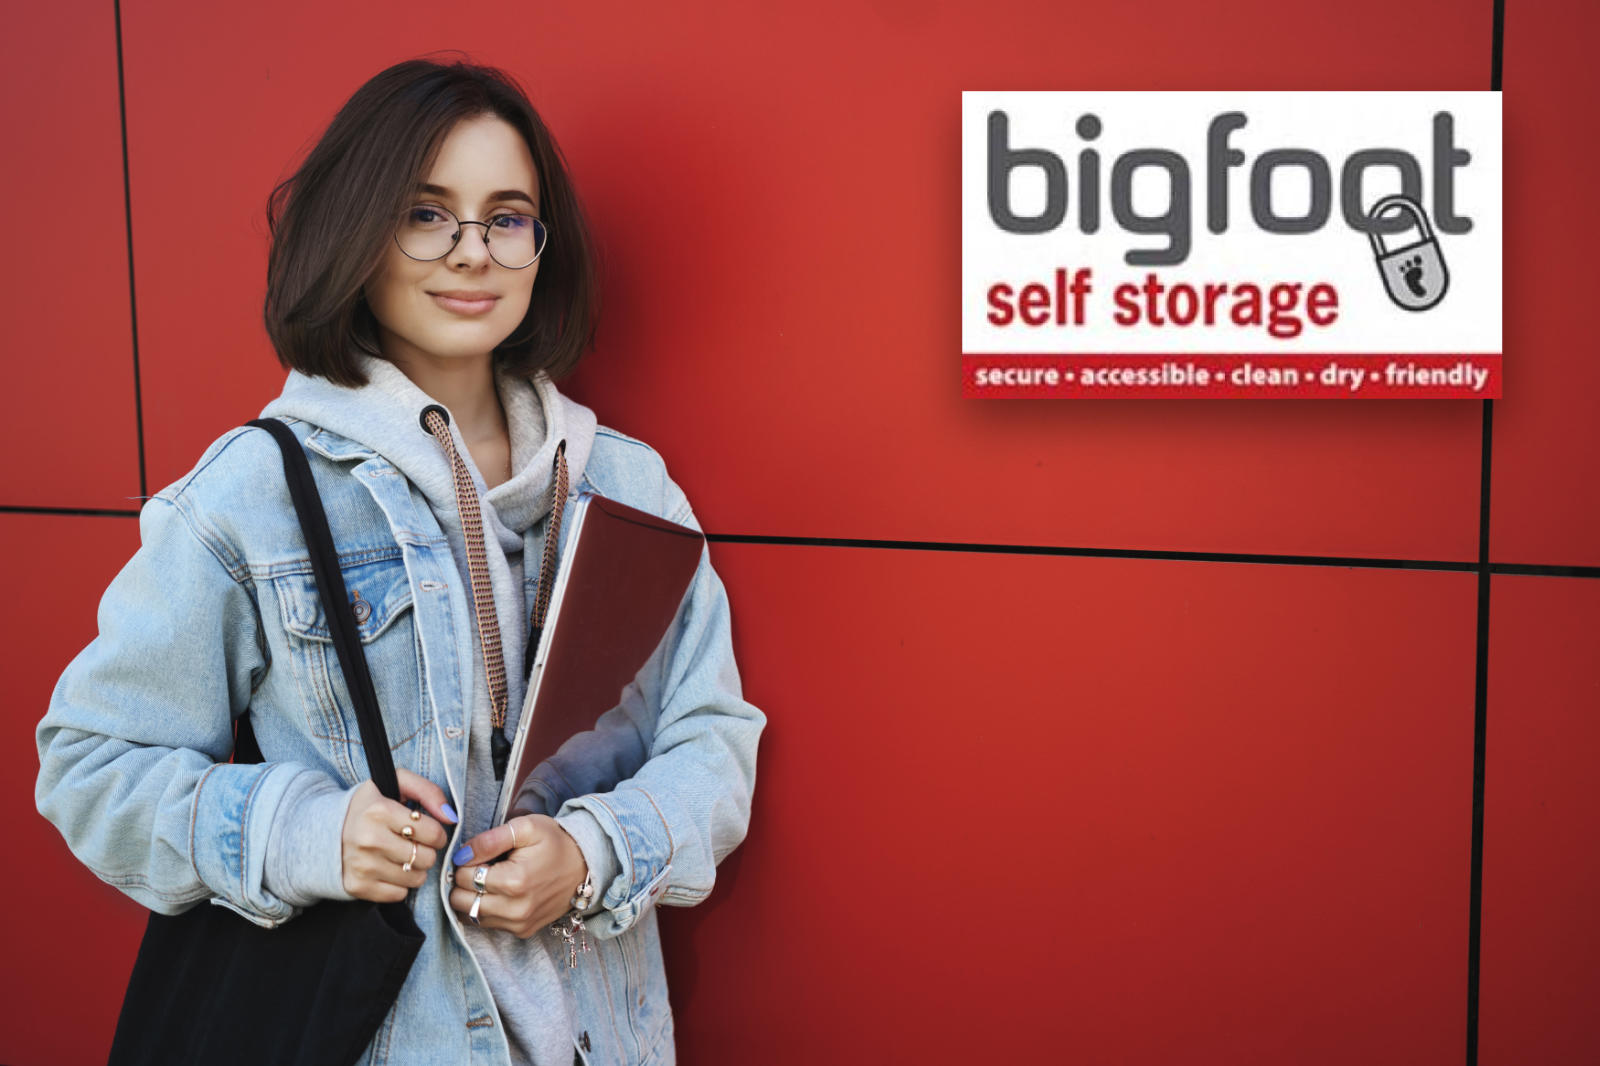 Self storage solutions for university students